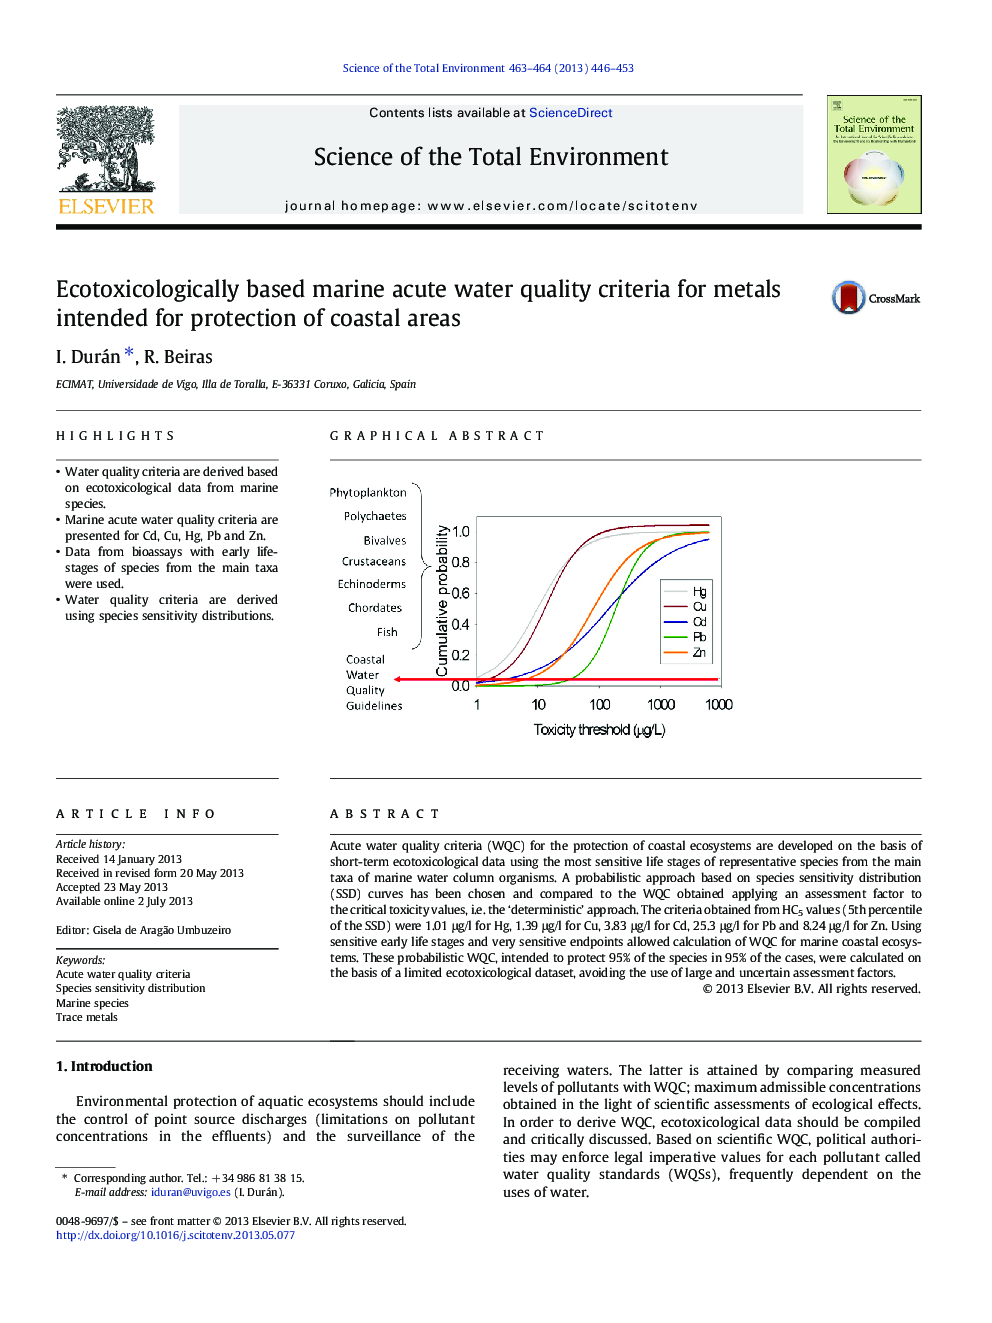 Ecotoxicologically based marine acute water quality criteria for metals intended for protection of coastal areas